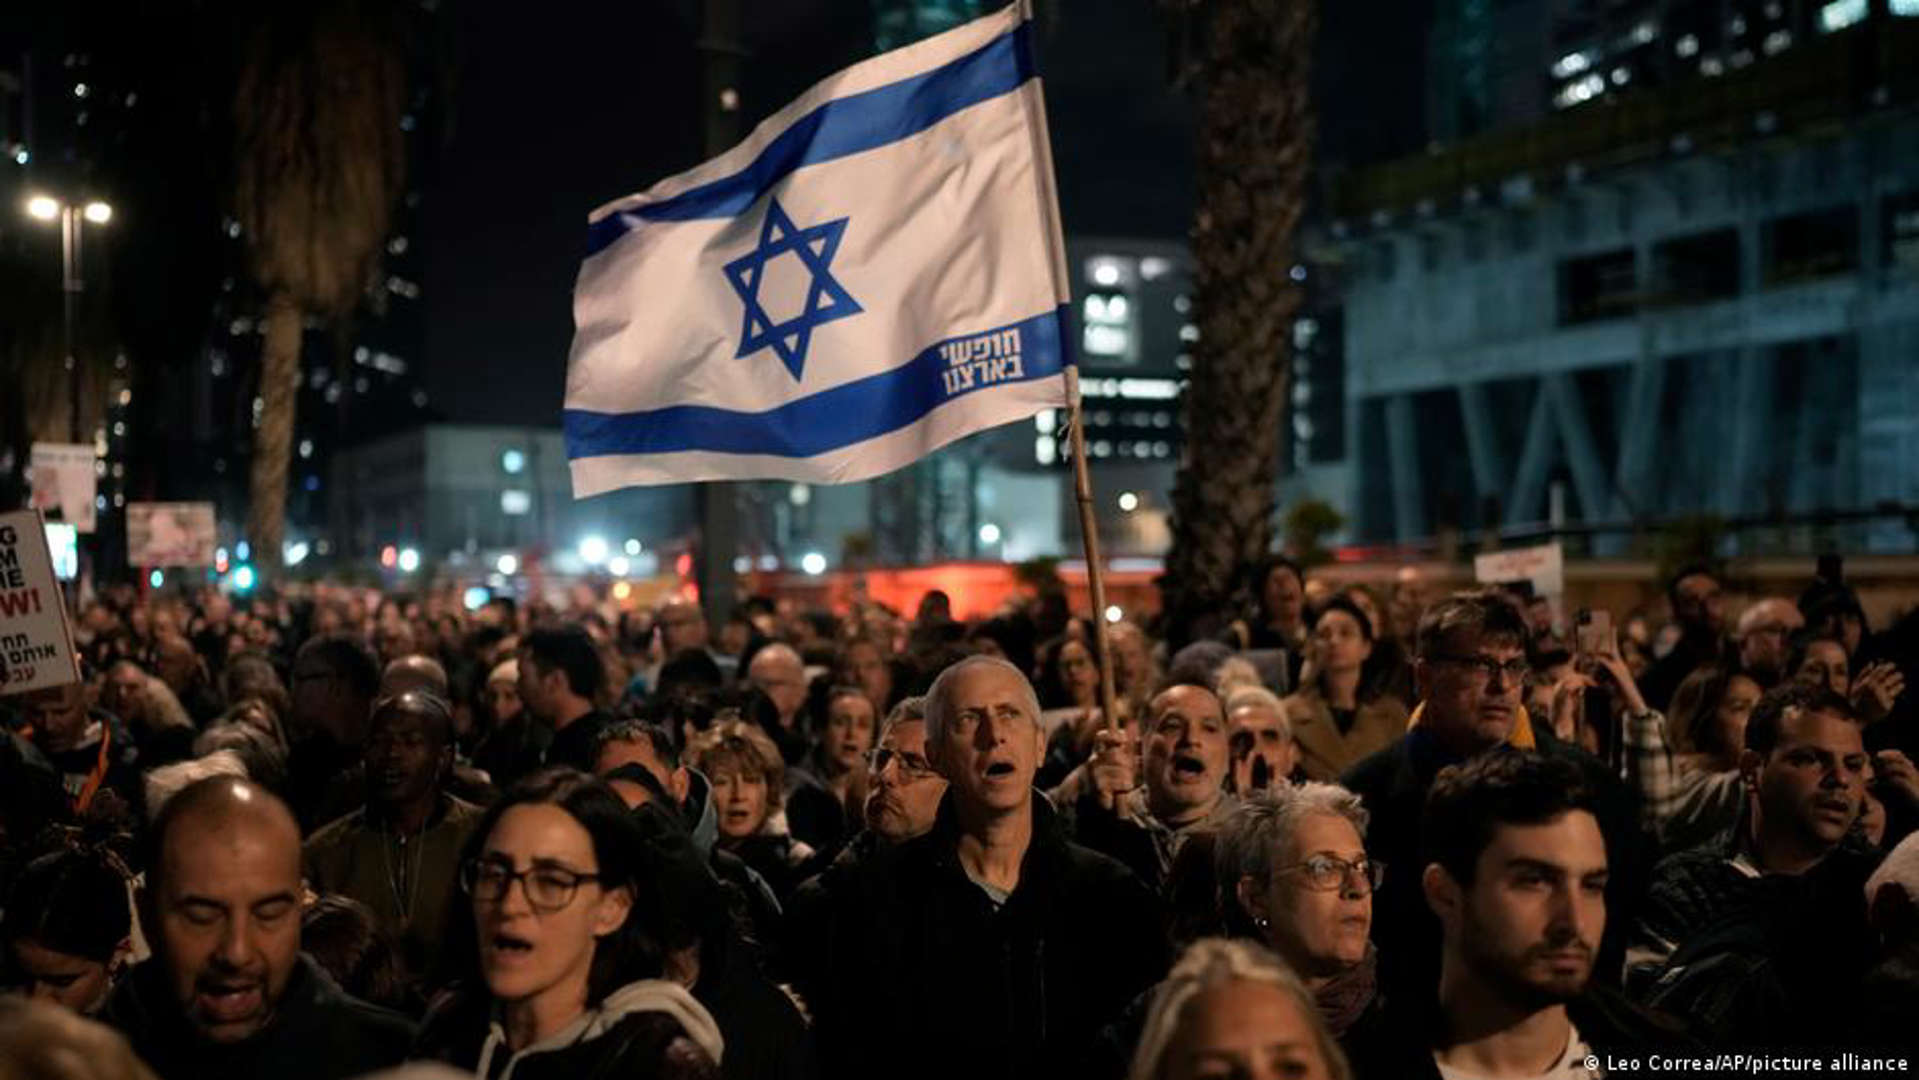 In Tel Aviv, numerous Israelis are once again demanding the release of the hostages